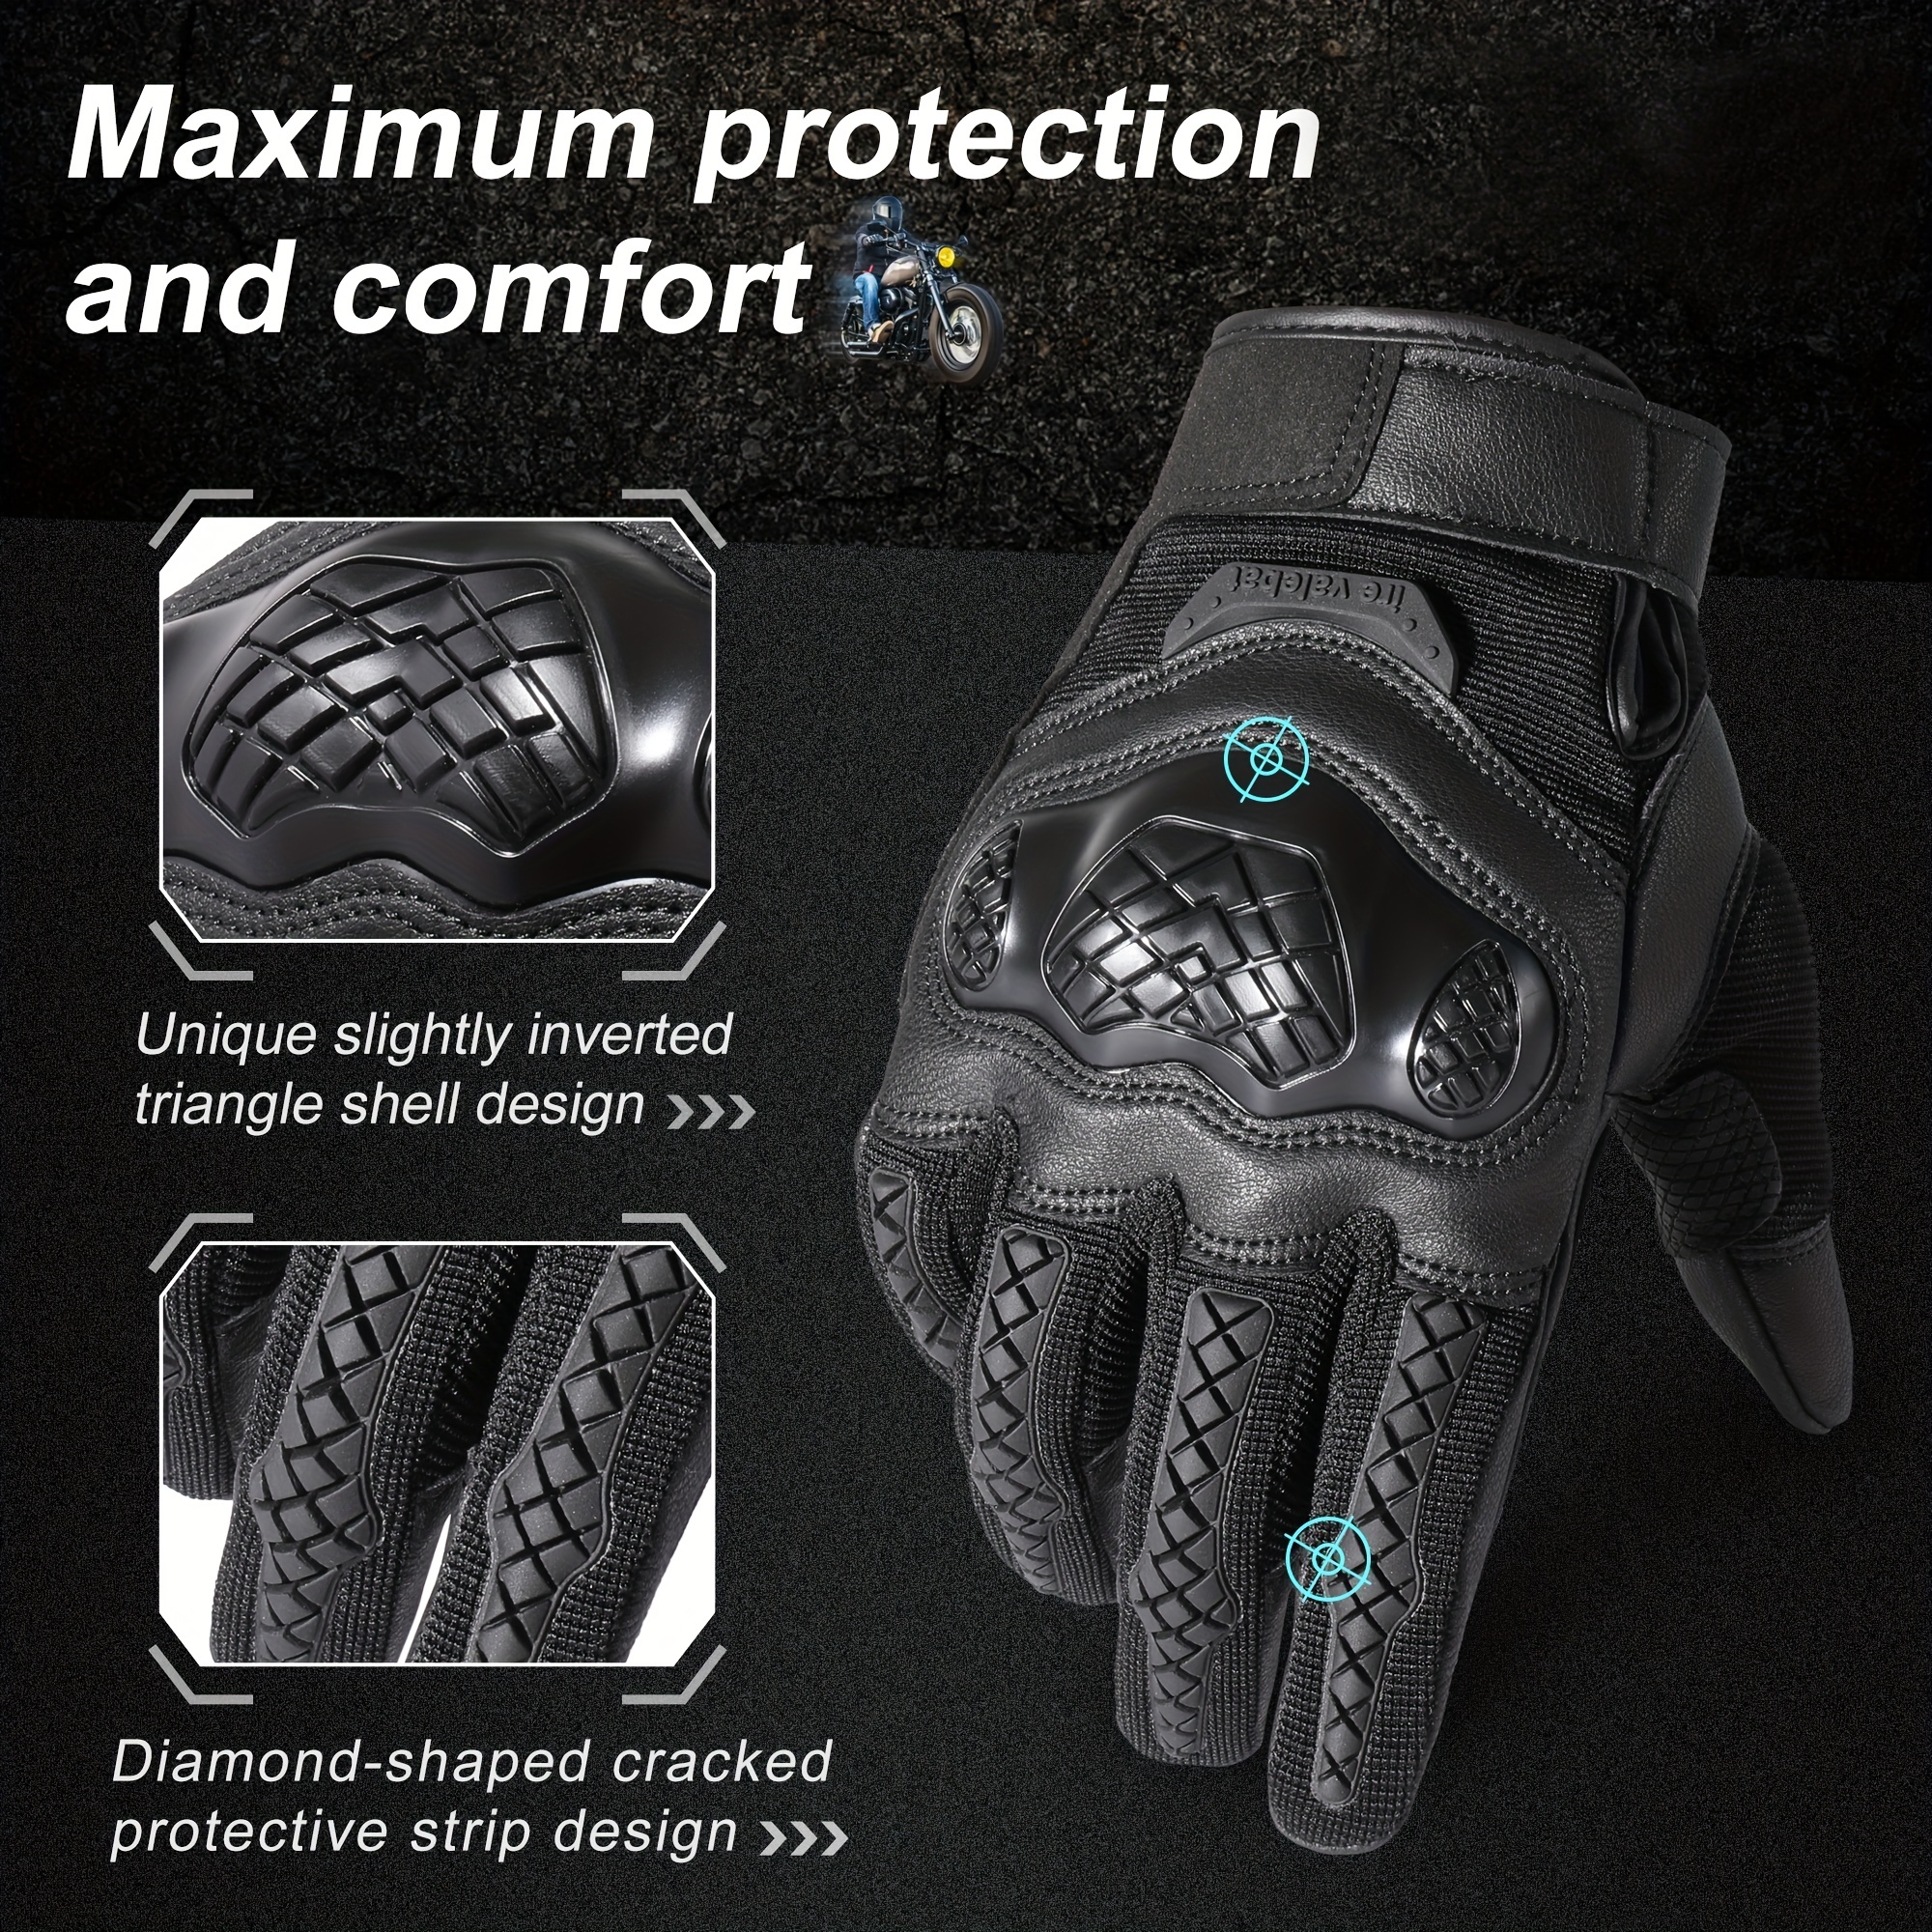 Zune Lotoo Leather Tactical Gloves for Men, Full Finger & Fingerless Motorcycle Gloves with Touchscreen Fingers, Eva Palm Padded Impact Protection